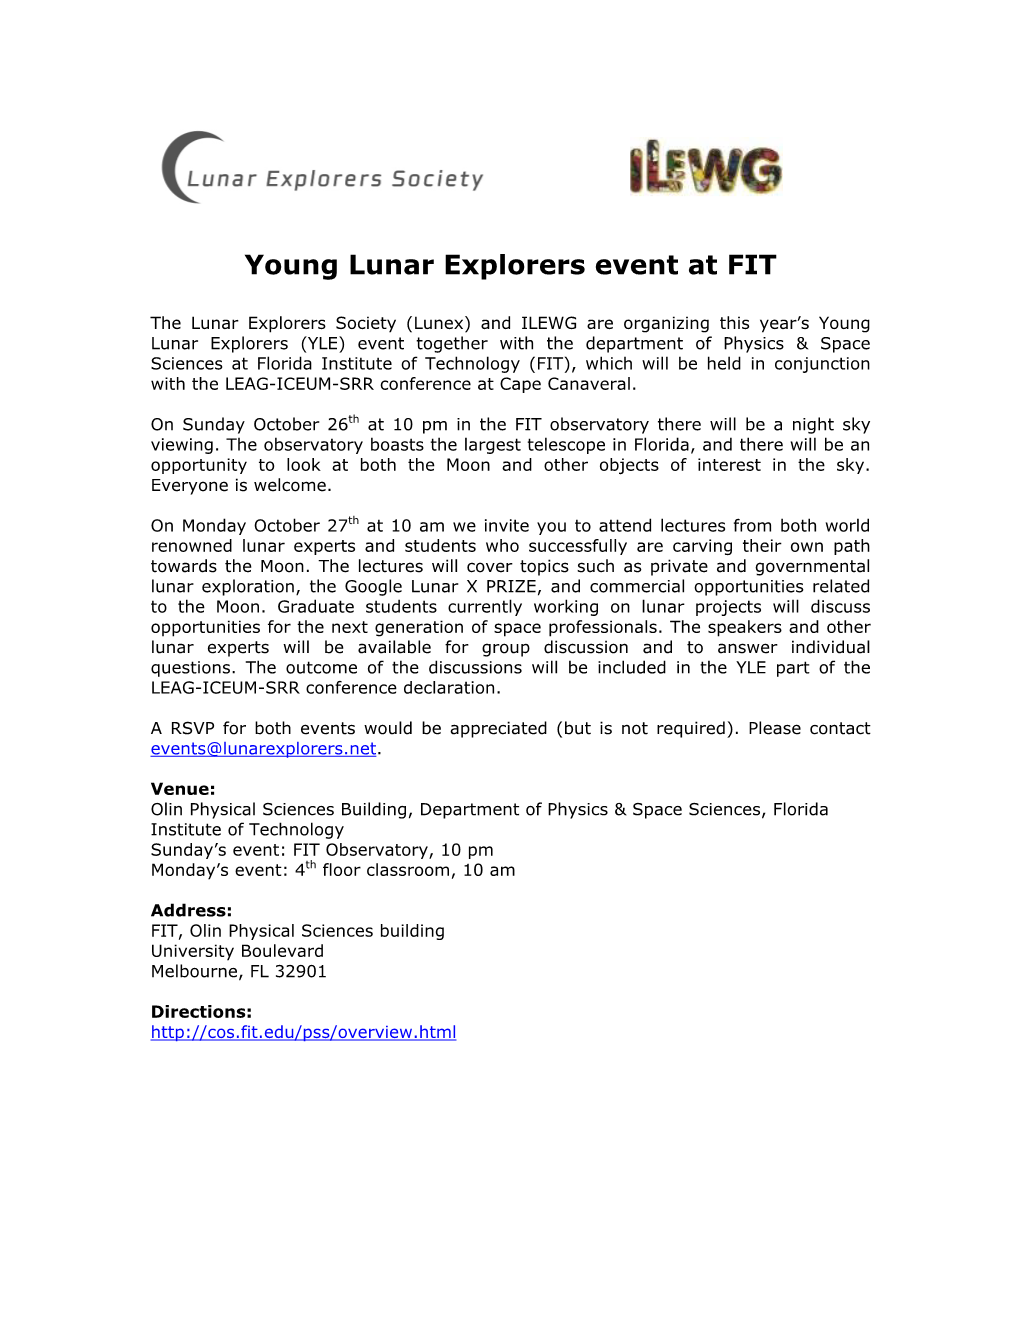 Young Lunar Explorers Event at FIT